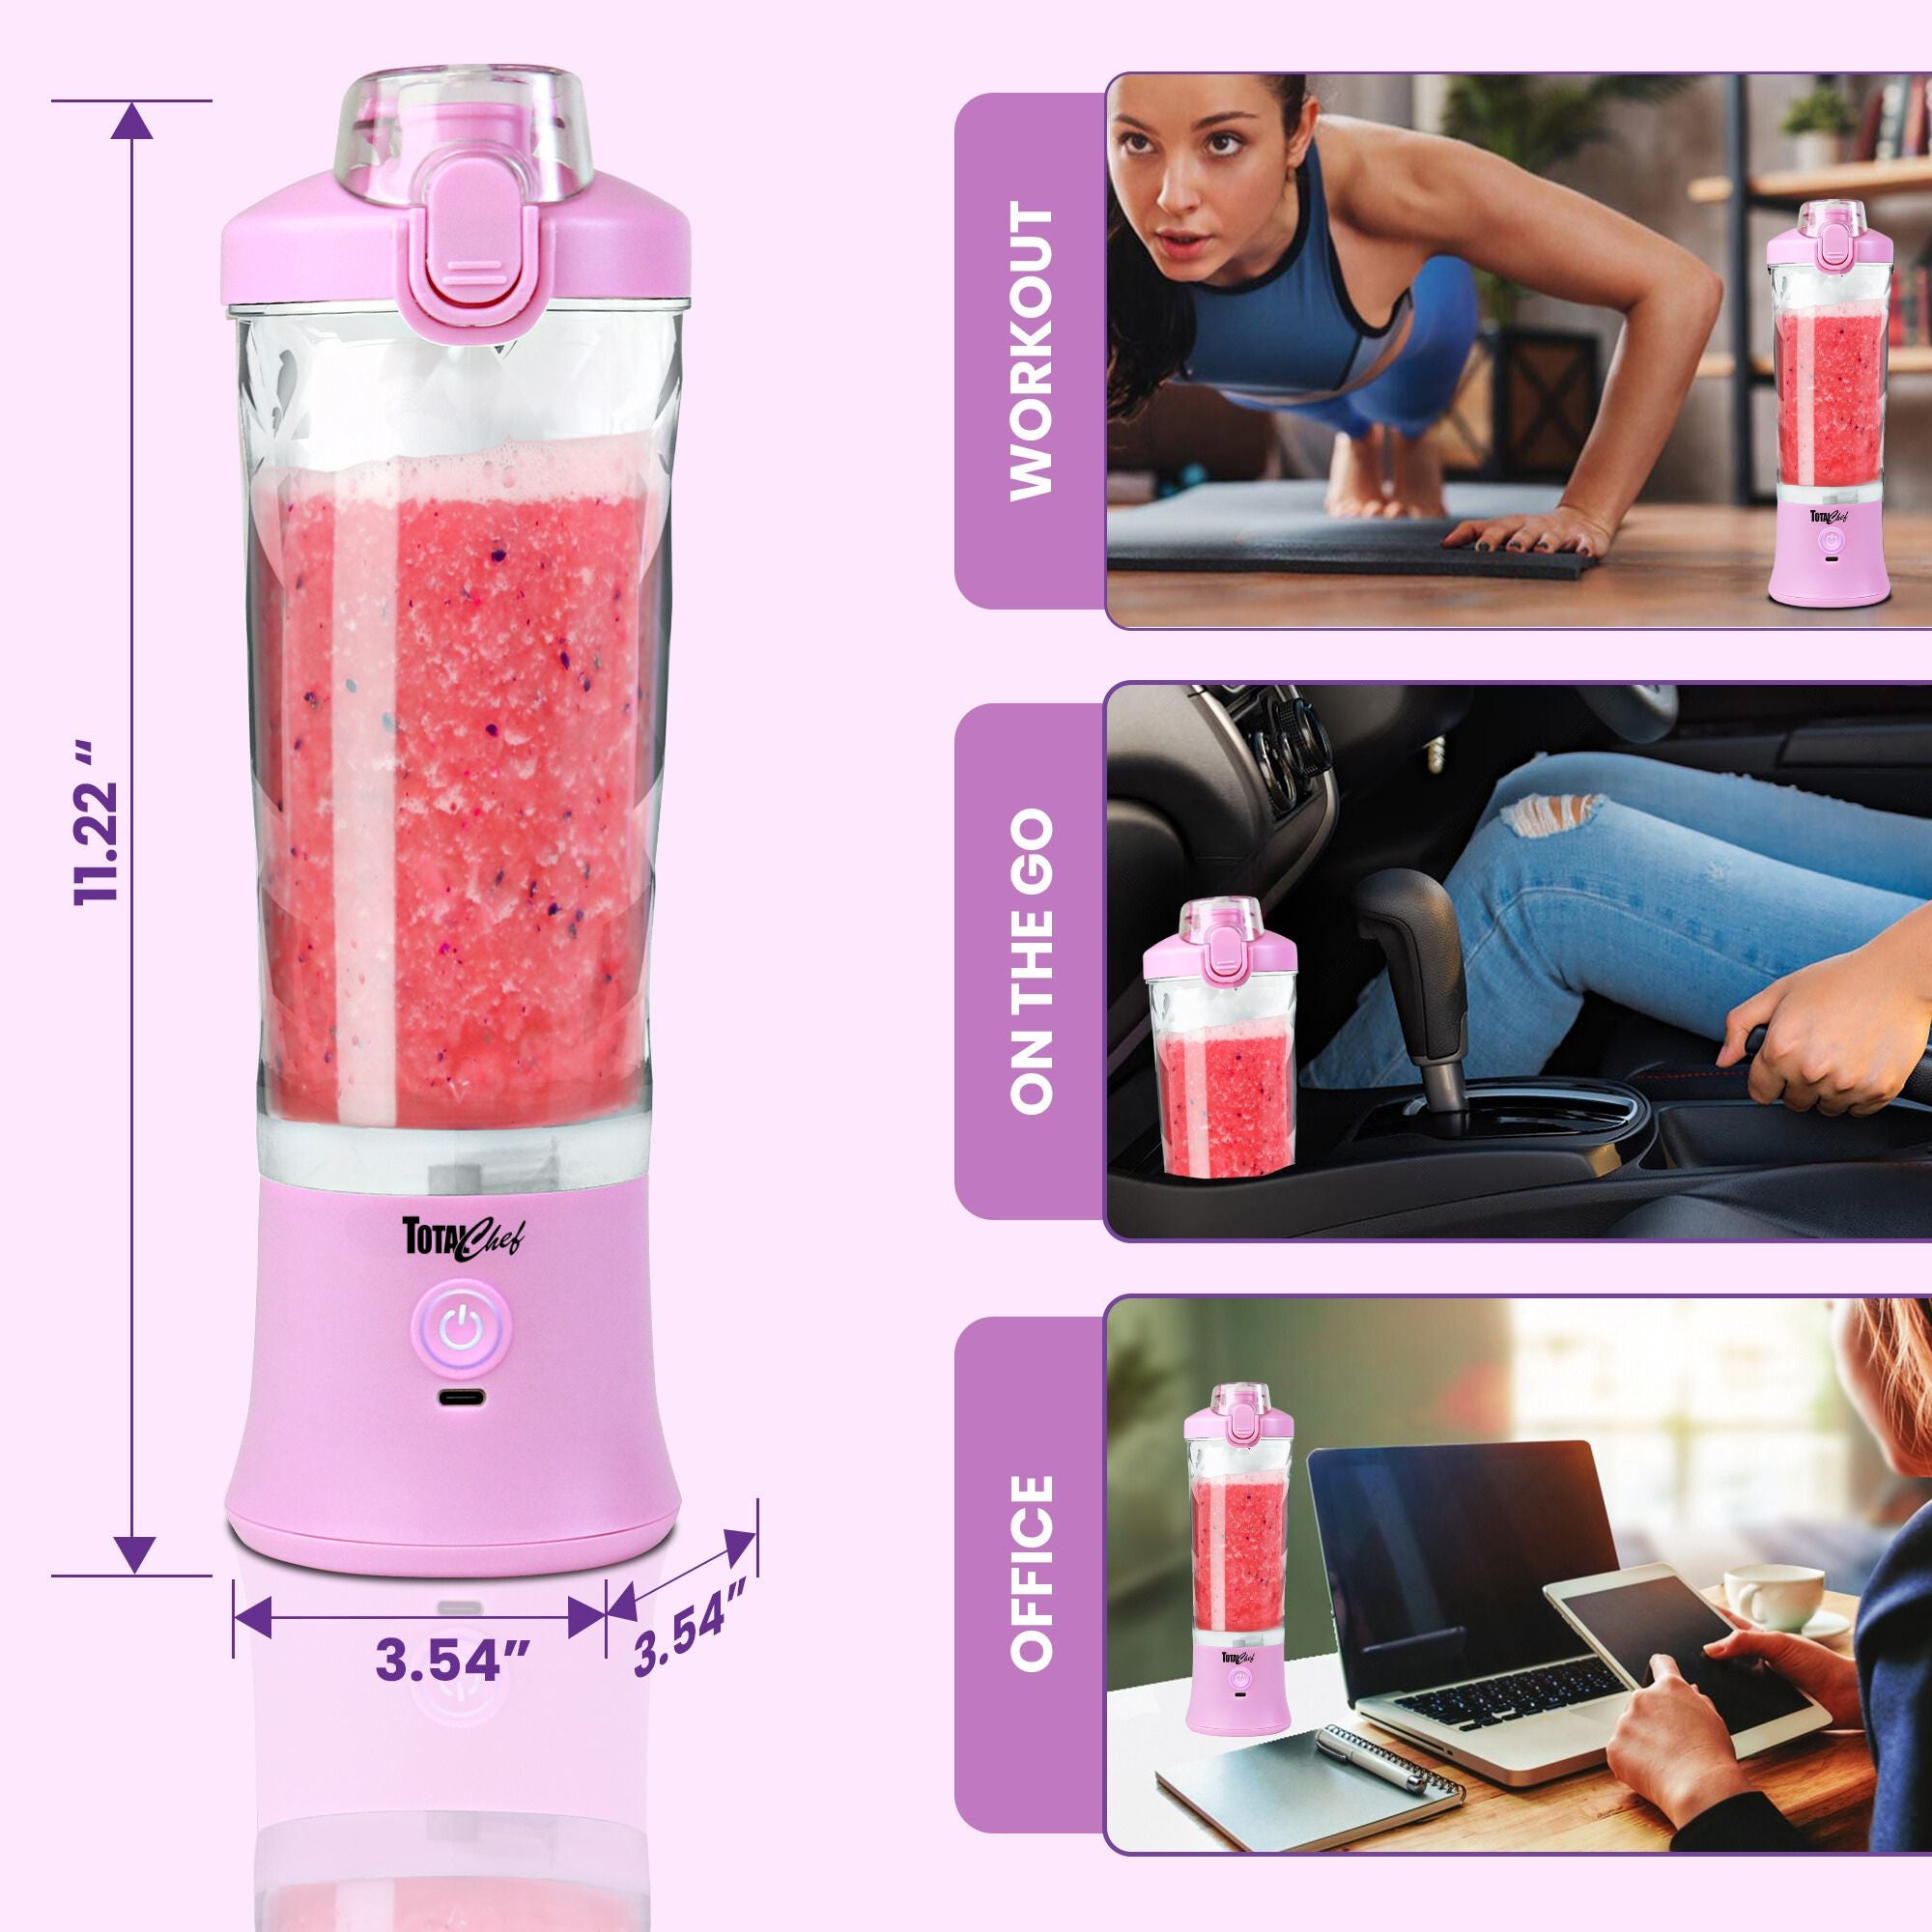 On the left is a product shot of the Total Chef portable blender filled with bright red smoothie on a pale pink background with dimensions labeled. Three inset images on the right show settings where you could use the blender, labeled: Workout; on the go; and office.